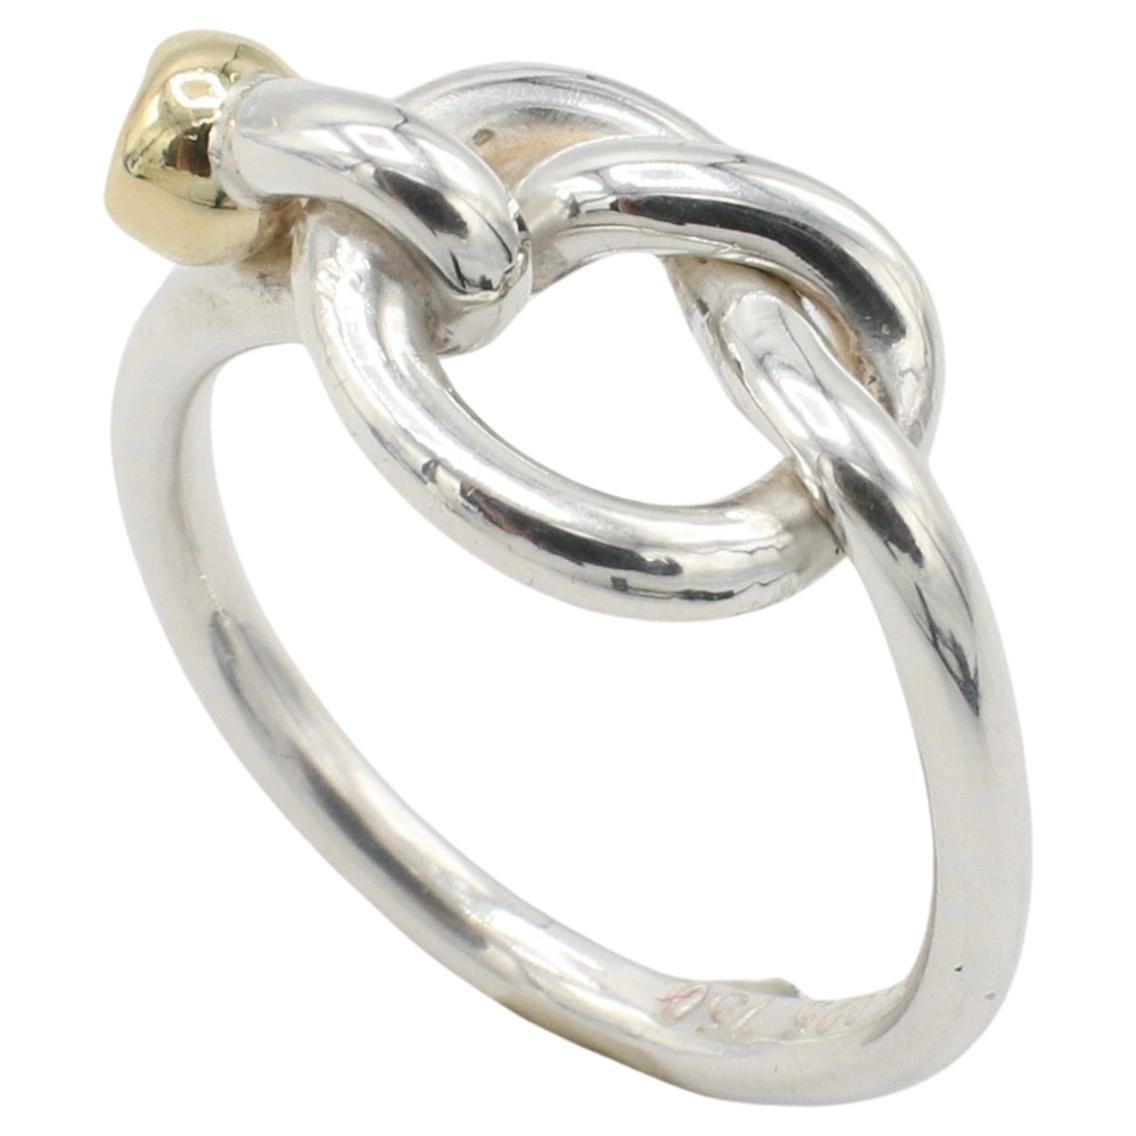 Tiffany & Co. Sterling Silver and 18K Yellow Gold Love Knot Ring
Metal: Sterling silver & 18k yellow gold
Weight: 2.86 grams
Size: 4.5 (US)
Signed: Tiffany & Co. 925 750
Width: 2 - 9.5mm
